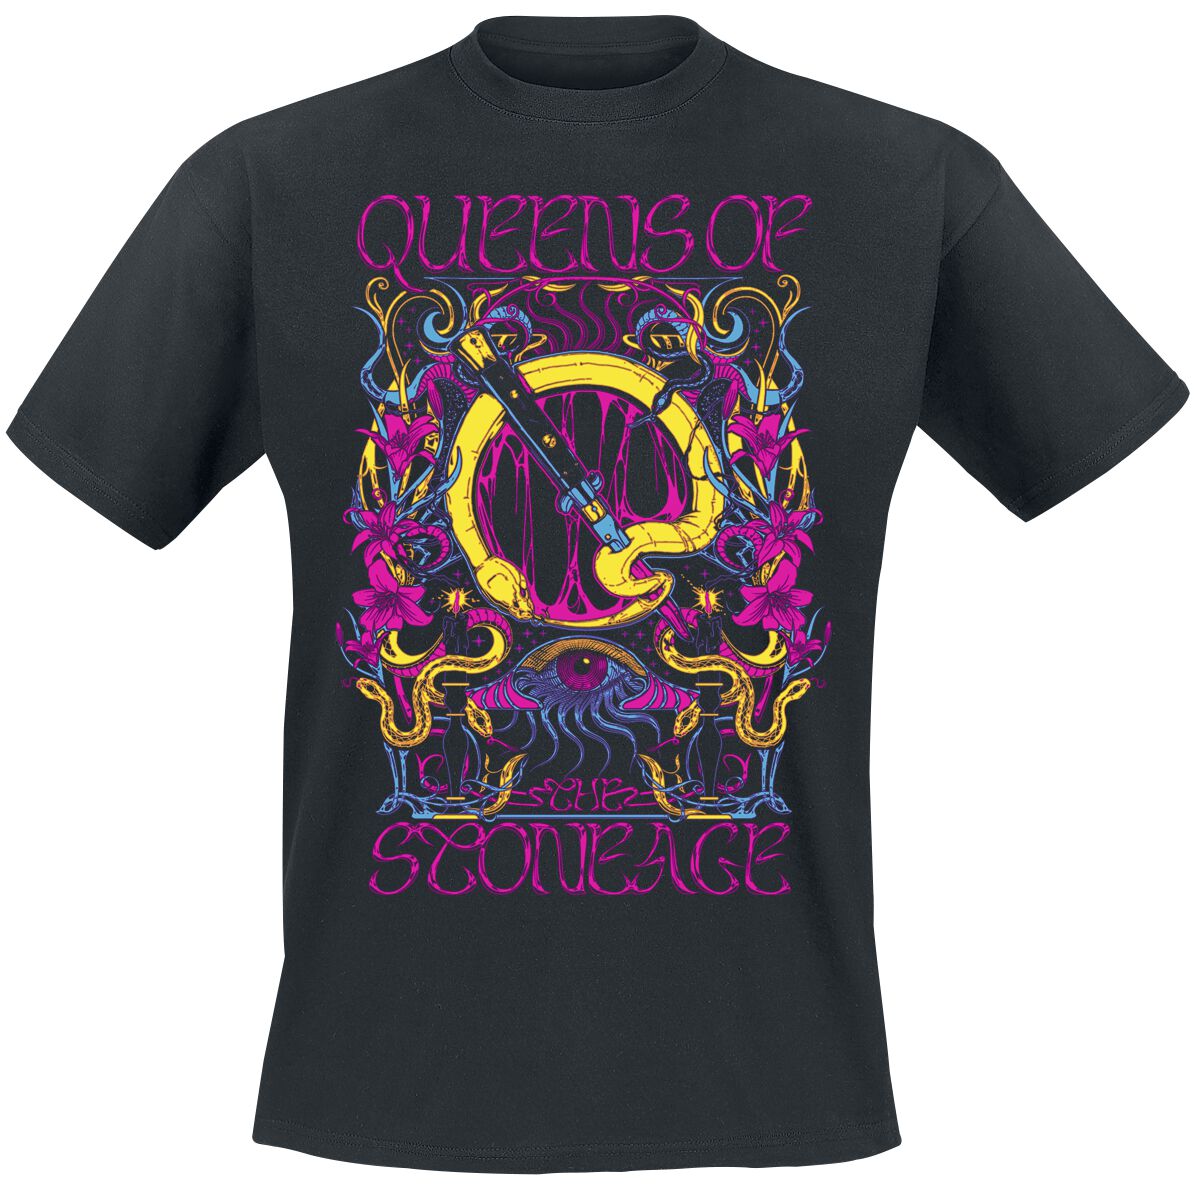 Queens Of The Stone Age In Times New Roman - Neon Sacrilege T-Shirt schwarz in S